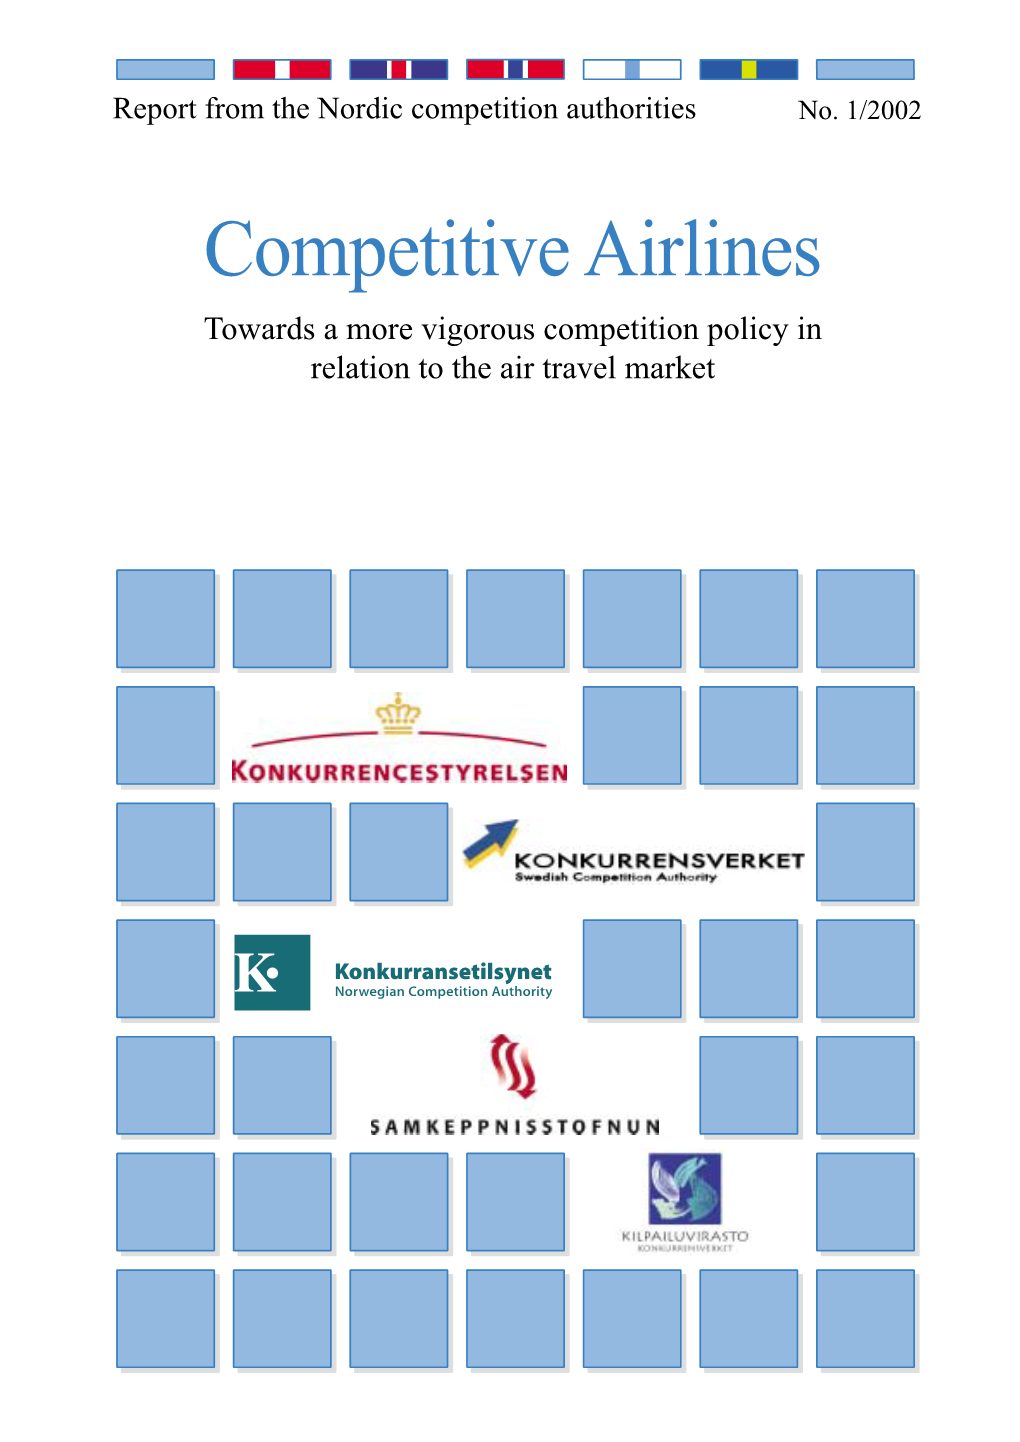 Competitive Airlines: Towards a More Vigorous Competition Policy In